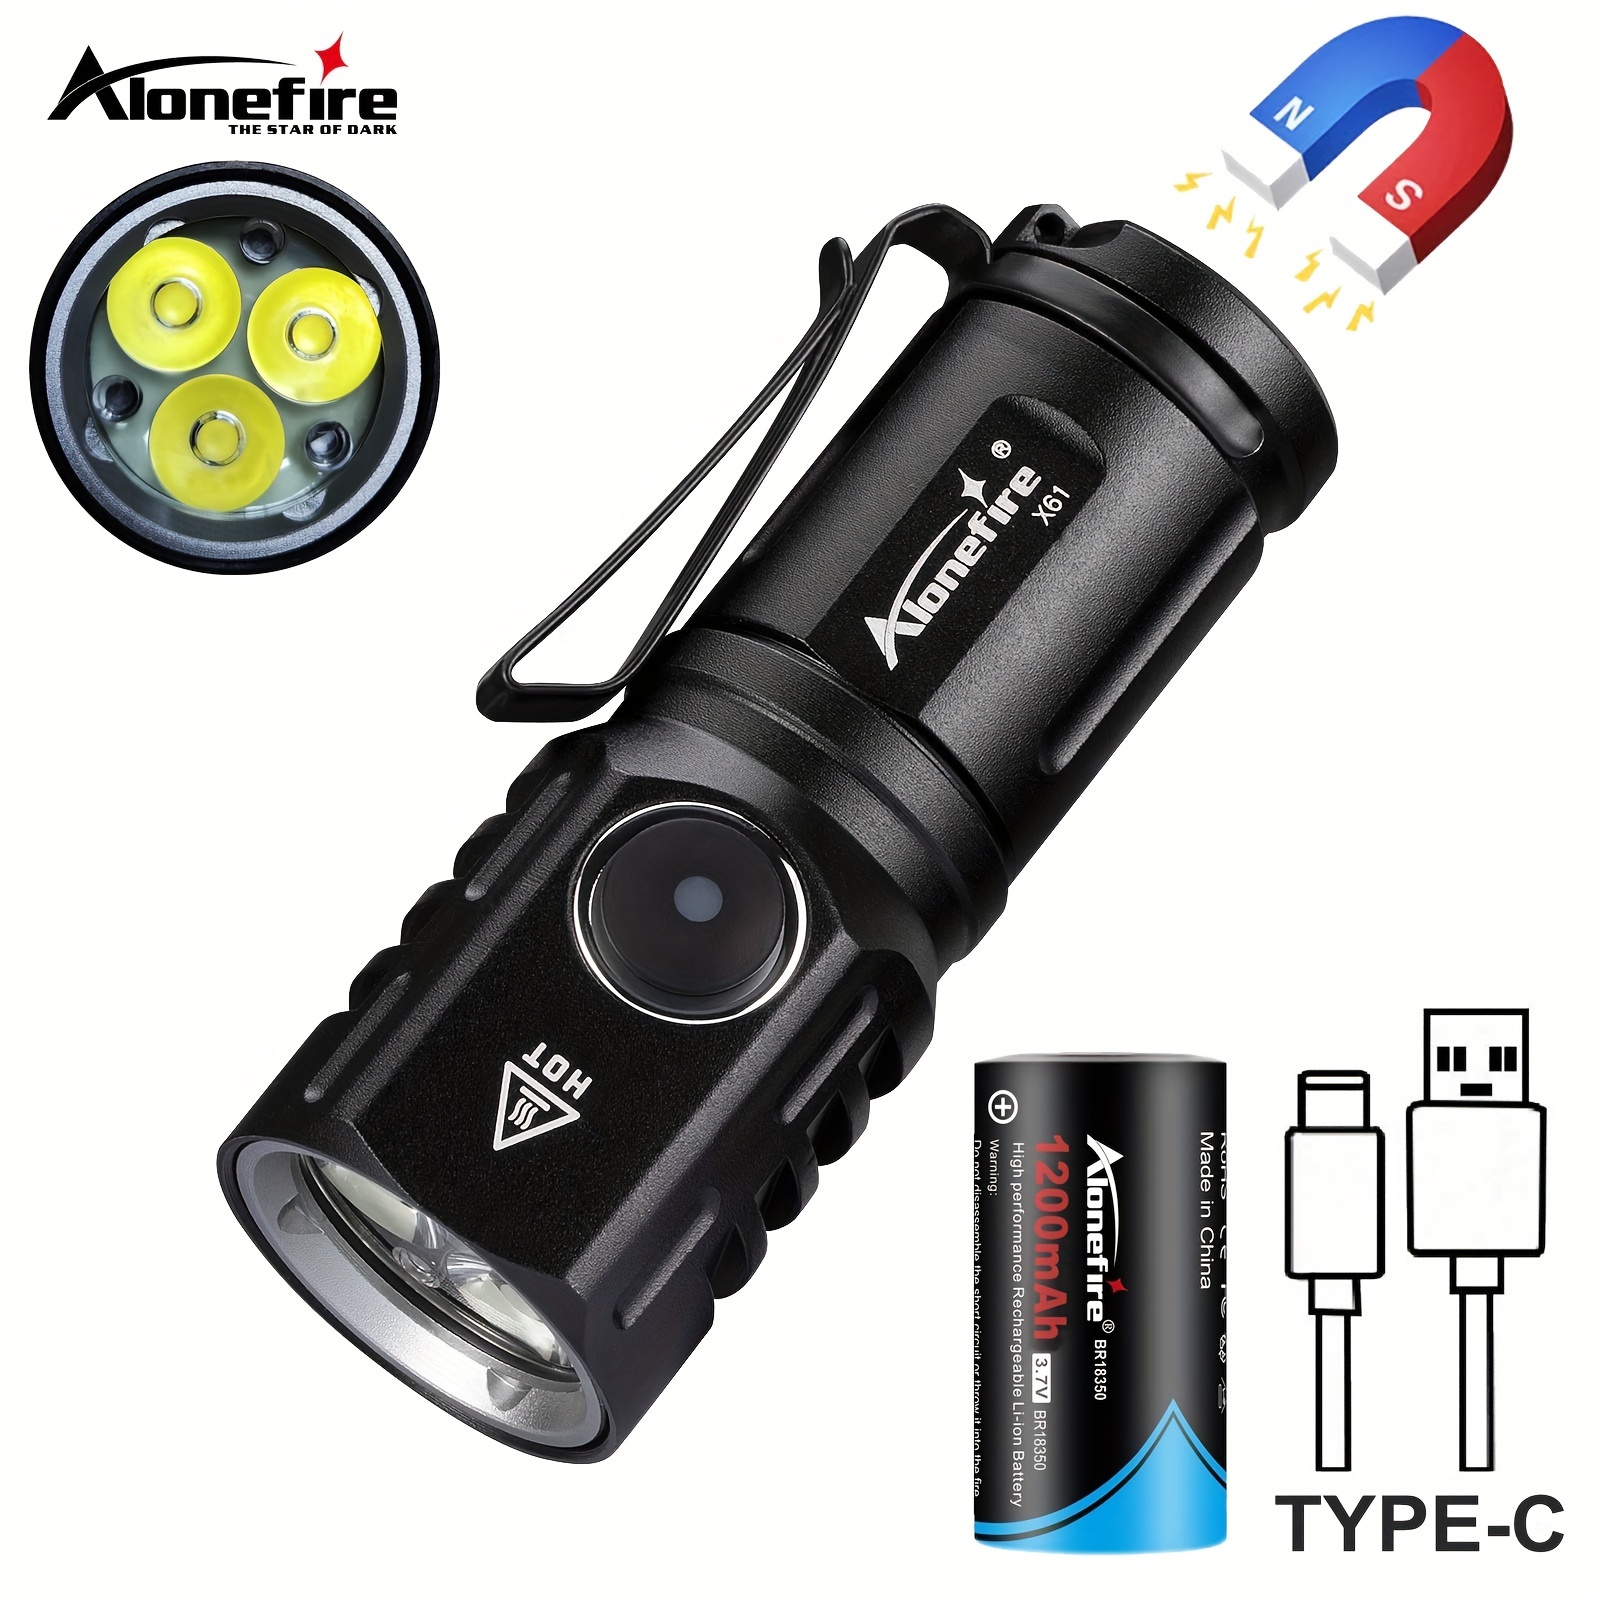 

6000k Mini 3x Xpg Led High Bright Small Flashlight, Type-c Usb Rechargeable Portable Clip Magnet Torch, For Outdoor Hiking Camping Home Work Car Repair